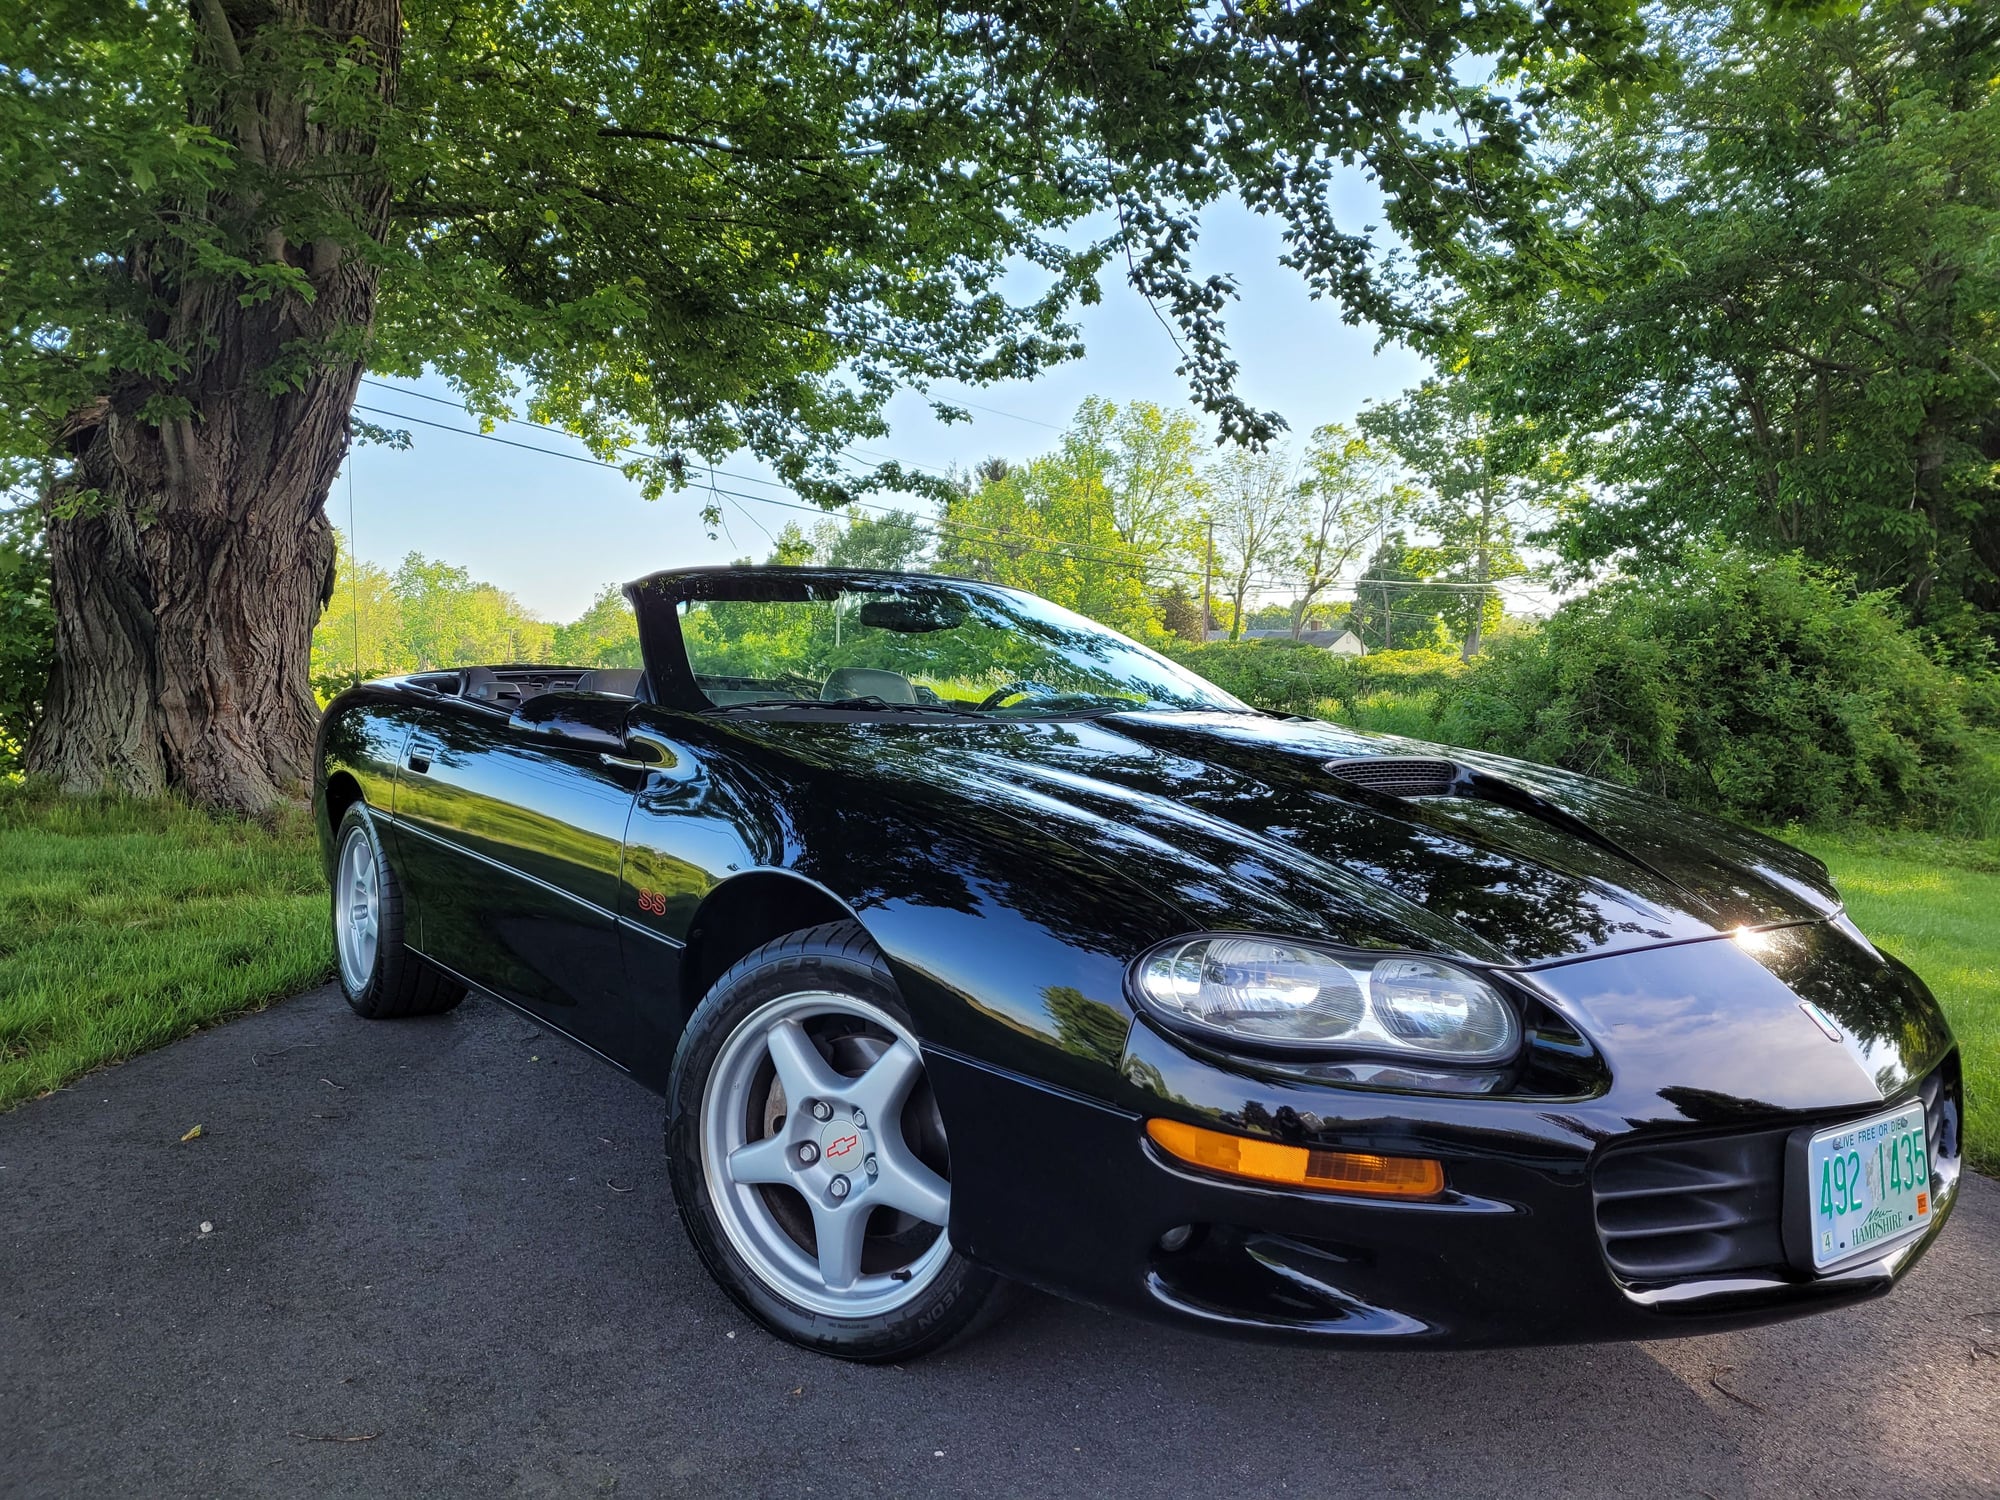 1999 Chevrolet Camaro - 1999 Camaro SS Convertible 68k Miles All Original - Used - VIN 123456789123456 - 68,400 Miles - 8 cyl - 2WD - Automatic - Convertible - Black - Greenland, NH 03840, United States